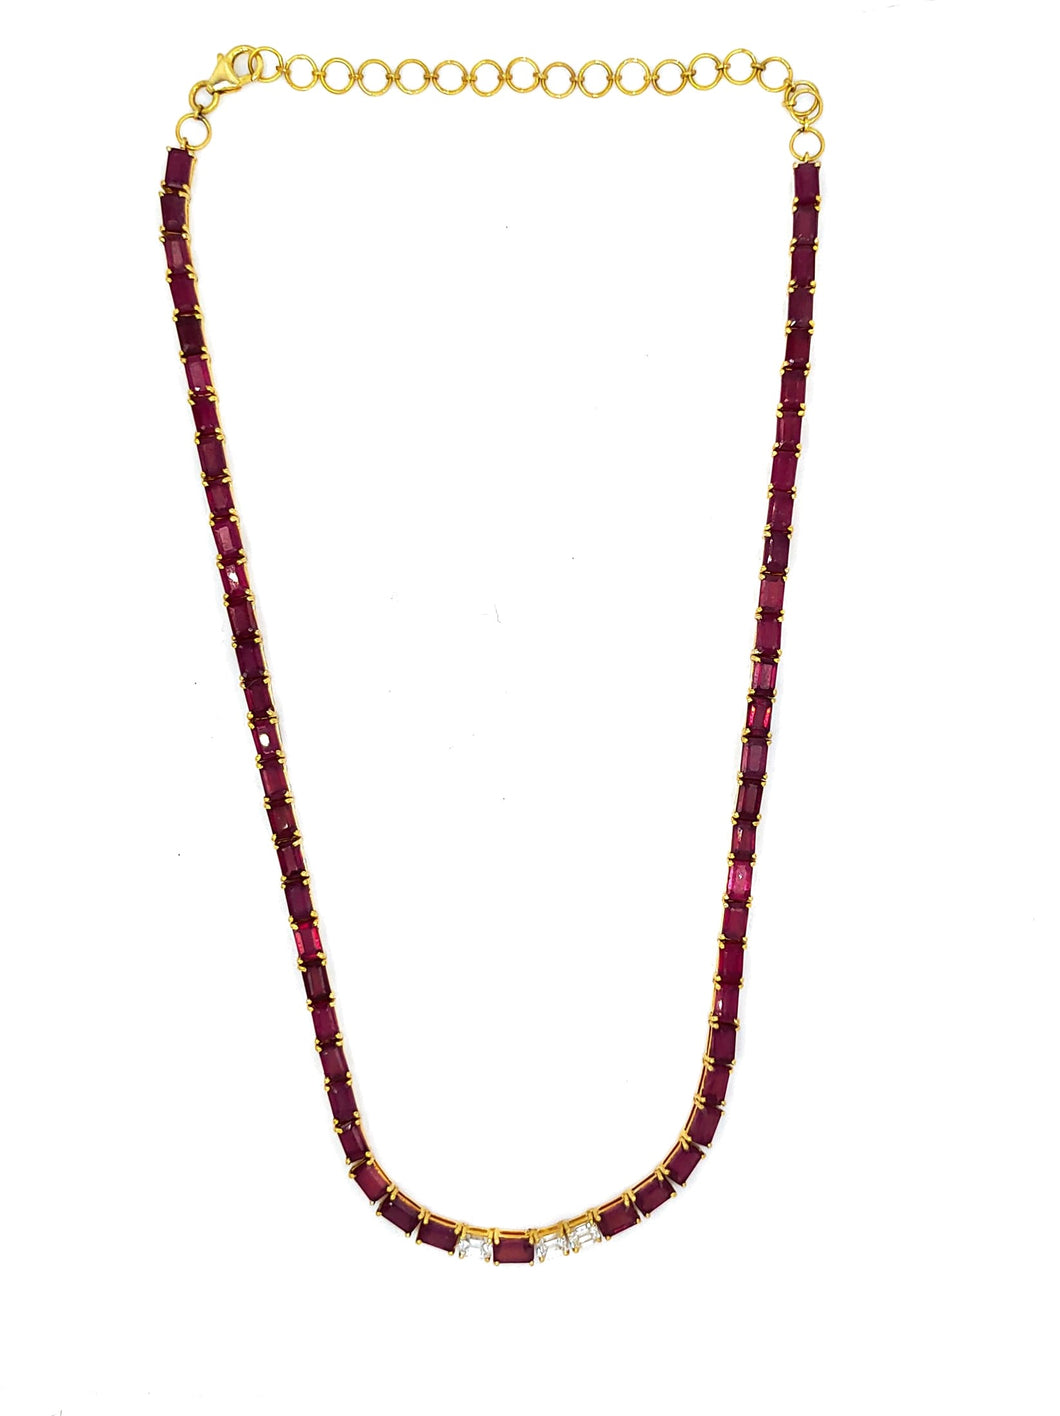 24 Ct Ruby 0.72 Ct Diamond Tennis Necklace in 18K Yellow Gold